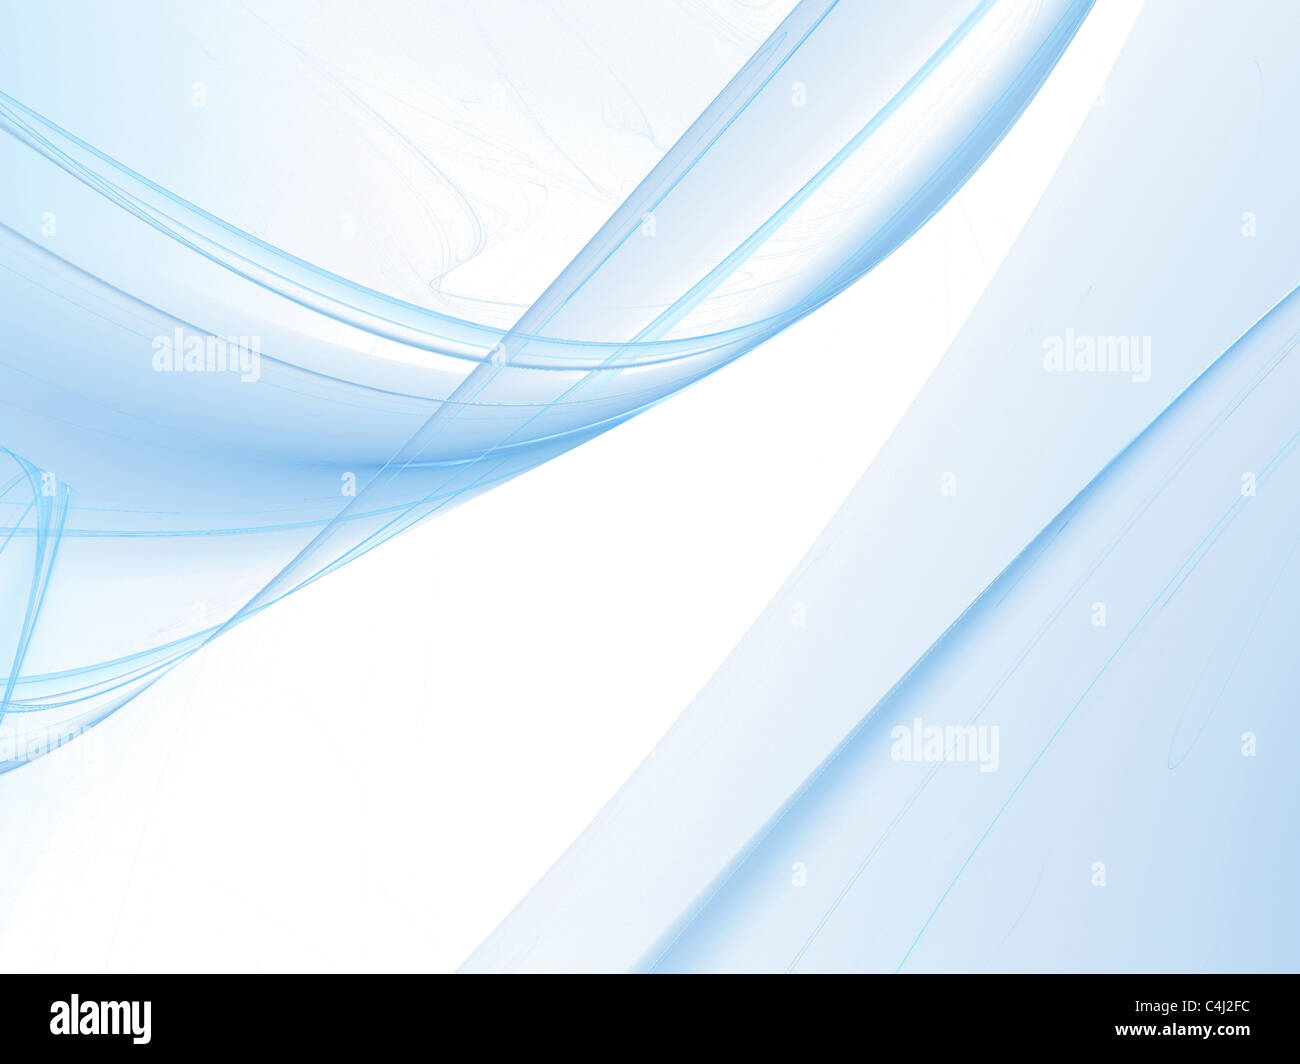 Abstract smooth lines illustration background Stock Photo